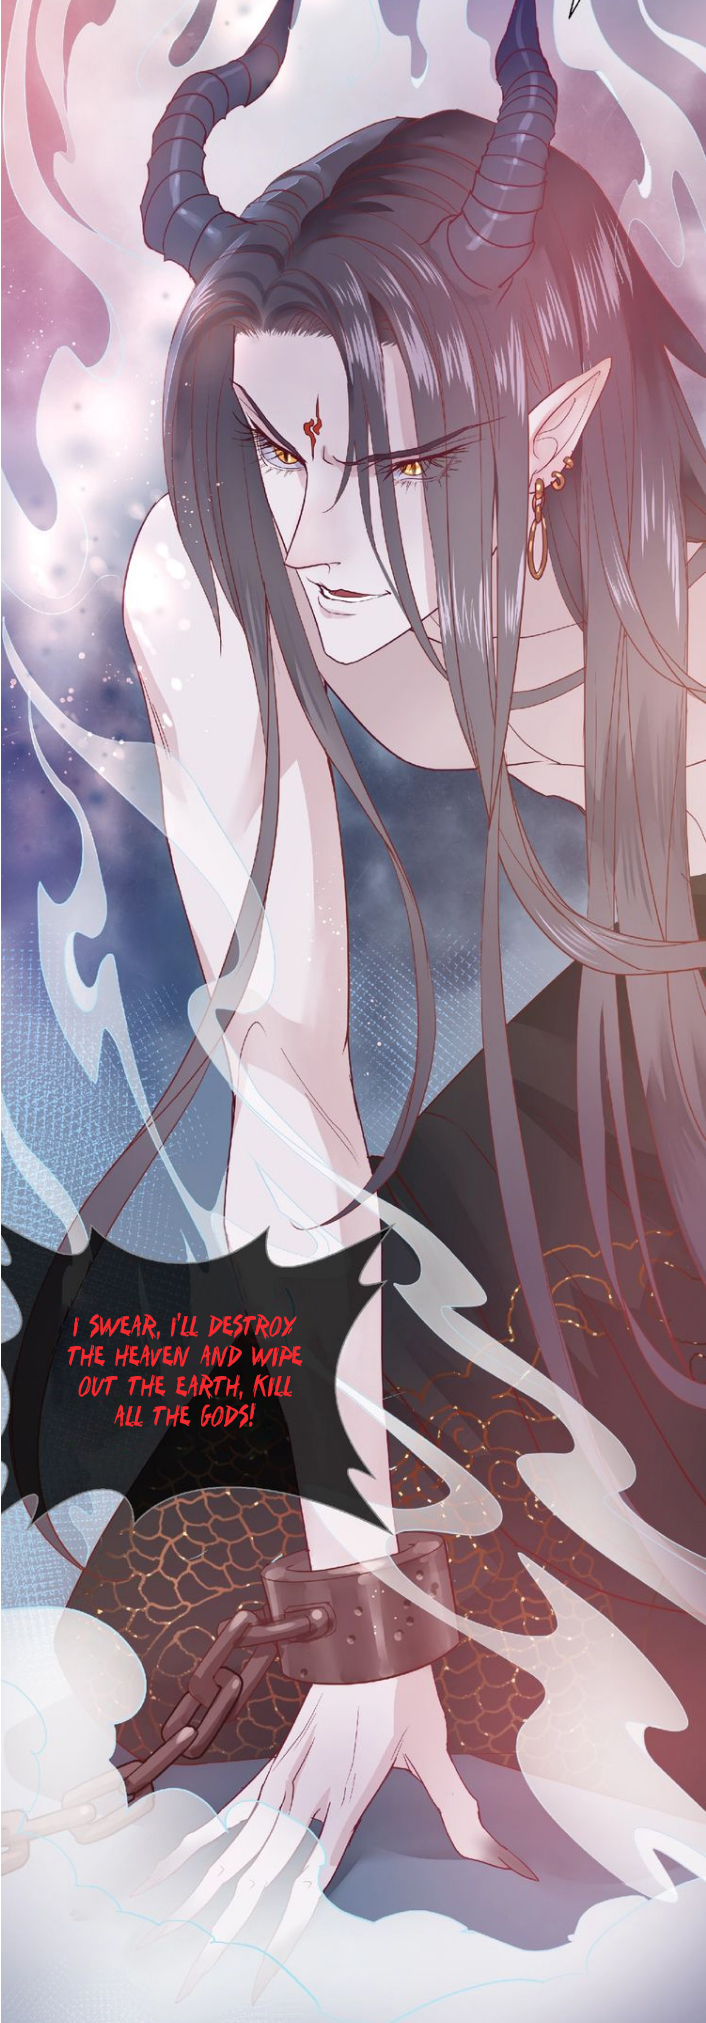 Devil Wants To Hug Ch. 1 Lovers that're Forced Apart